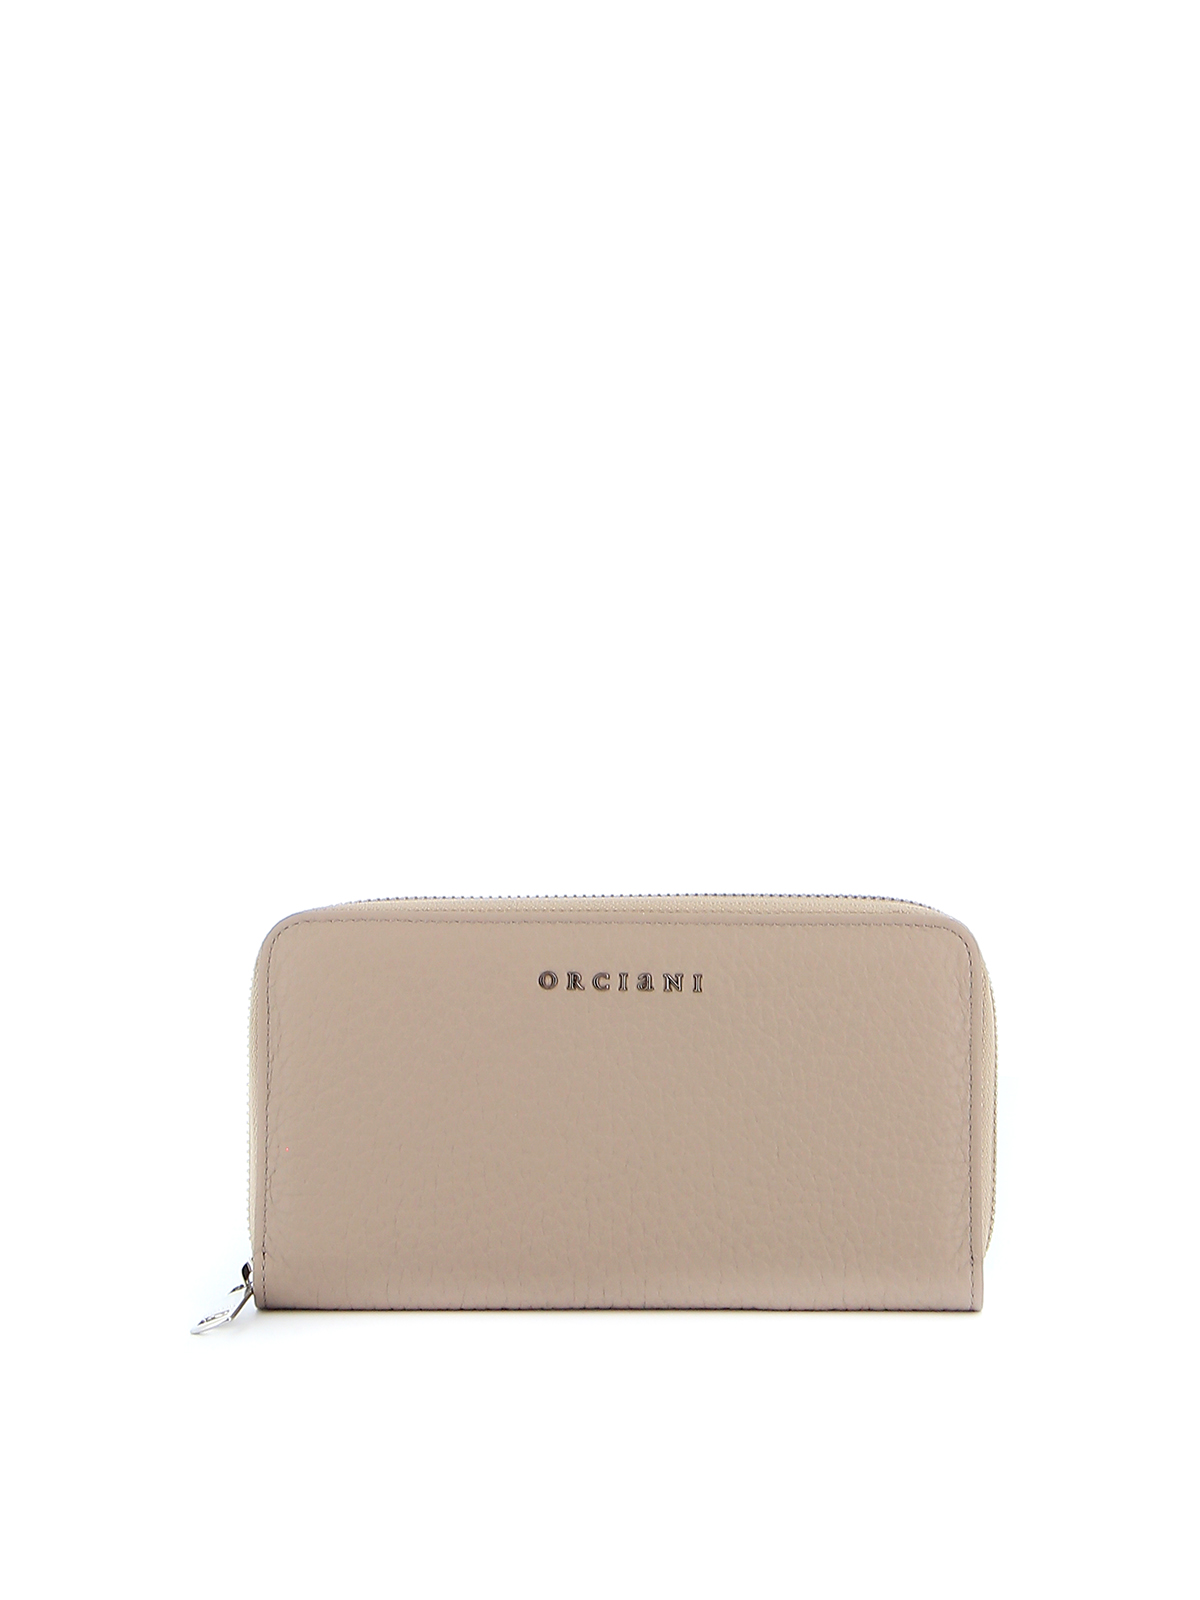 ORCIANI CONCHIGLIA LEATHER SOFT ZIP AROUND WALLET